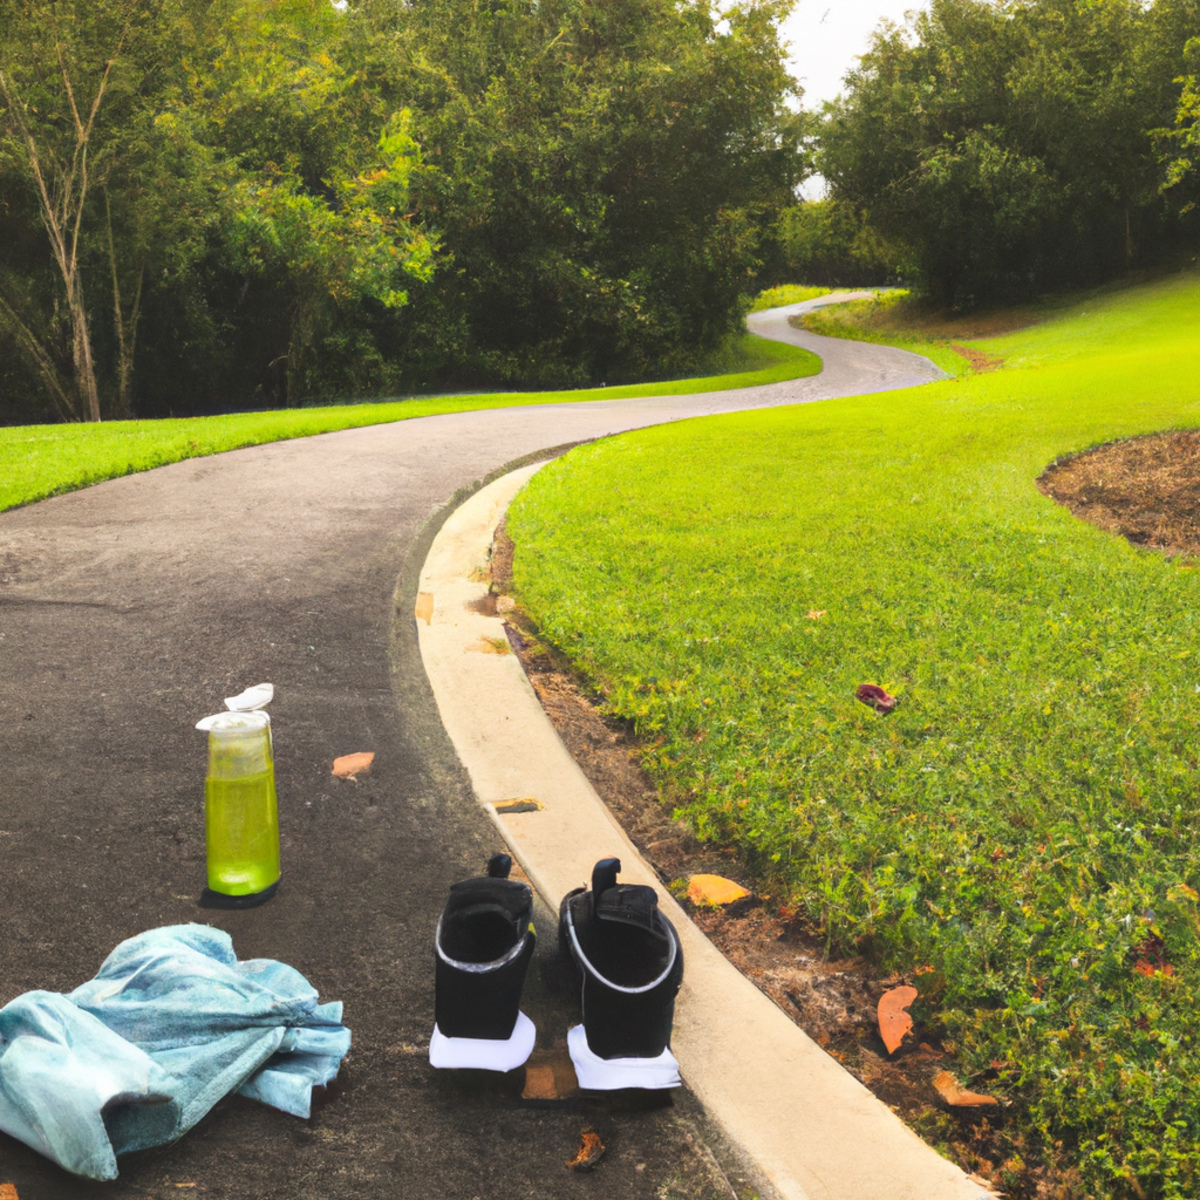 The photo captures a scenic view of a lush green park with a winding path in the foreground. In the center of the frame, there is a pair of running shoes placed on the ground, indicating the start of a cardio workout. A water bottle and a sweat towel are placed next to the shoes, suggesting that the person is well-prepared for the exercise. In the background, there are people jogging, cycling, and doing various other outdoor activities, creating a vibrant and energetic atmosphere. The photo perfectly encapsulates the essence of the article, inspiring readers to step out and get their heart pumping with the best cardio workouts in the great outdoors.